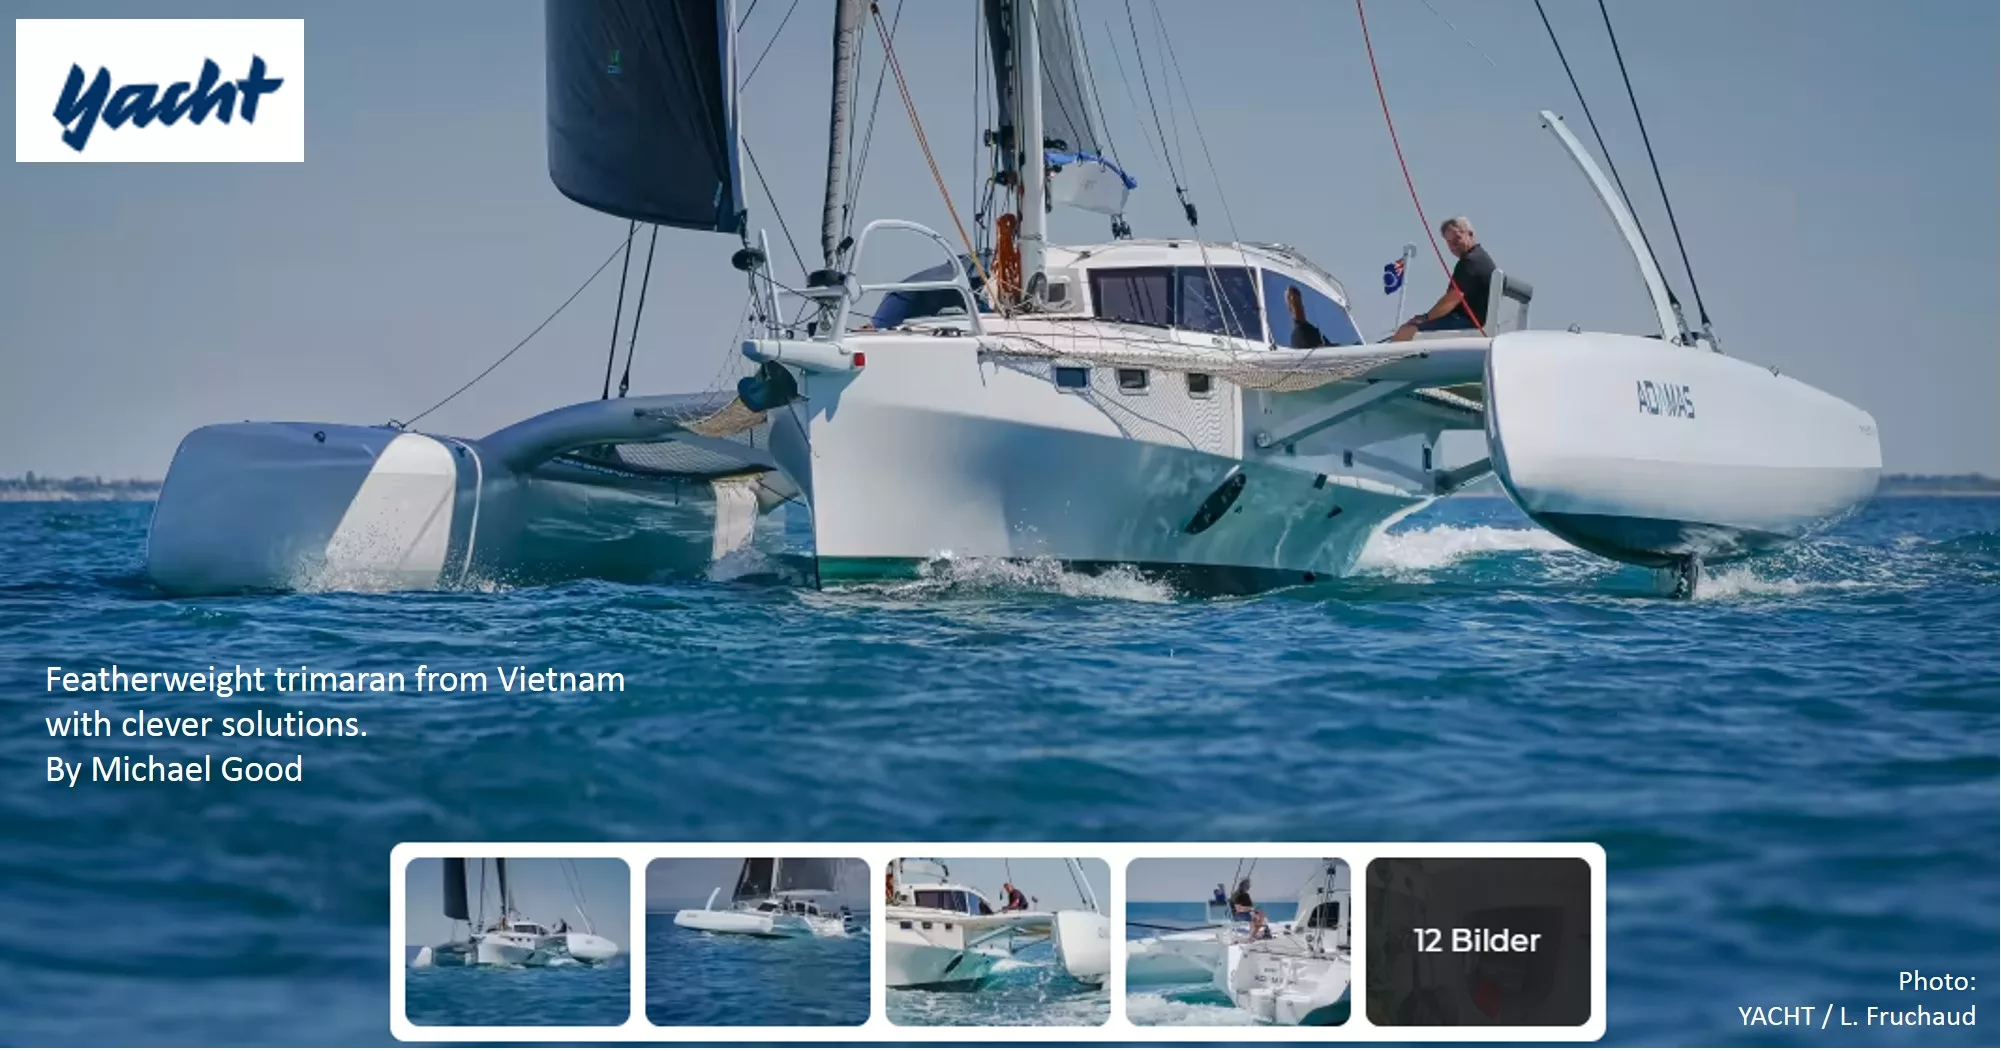 R40 Featherweight trimaran from Vietnam with clever solutions, reports Yacht Magazine